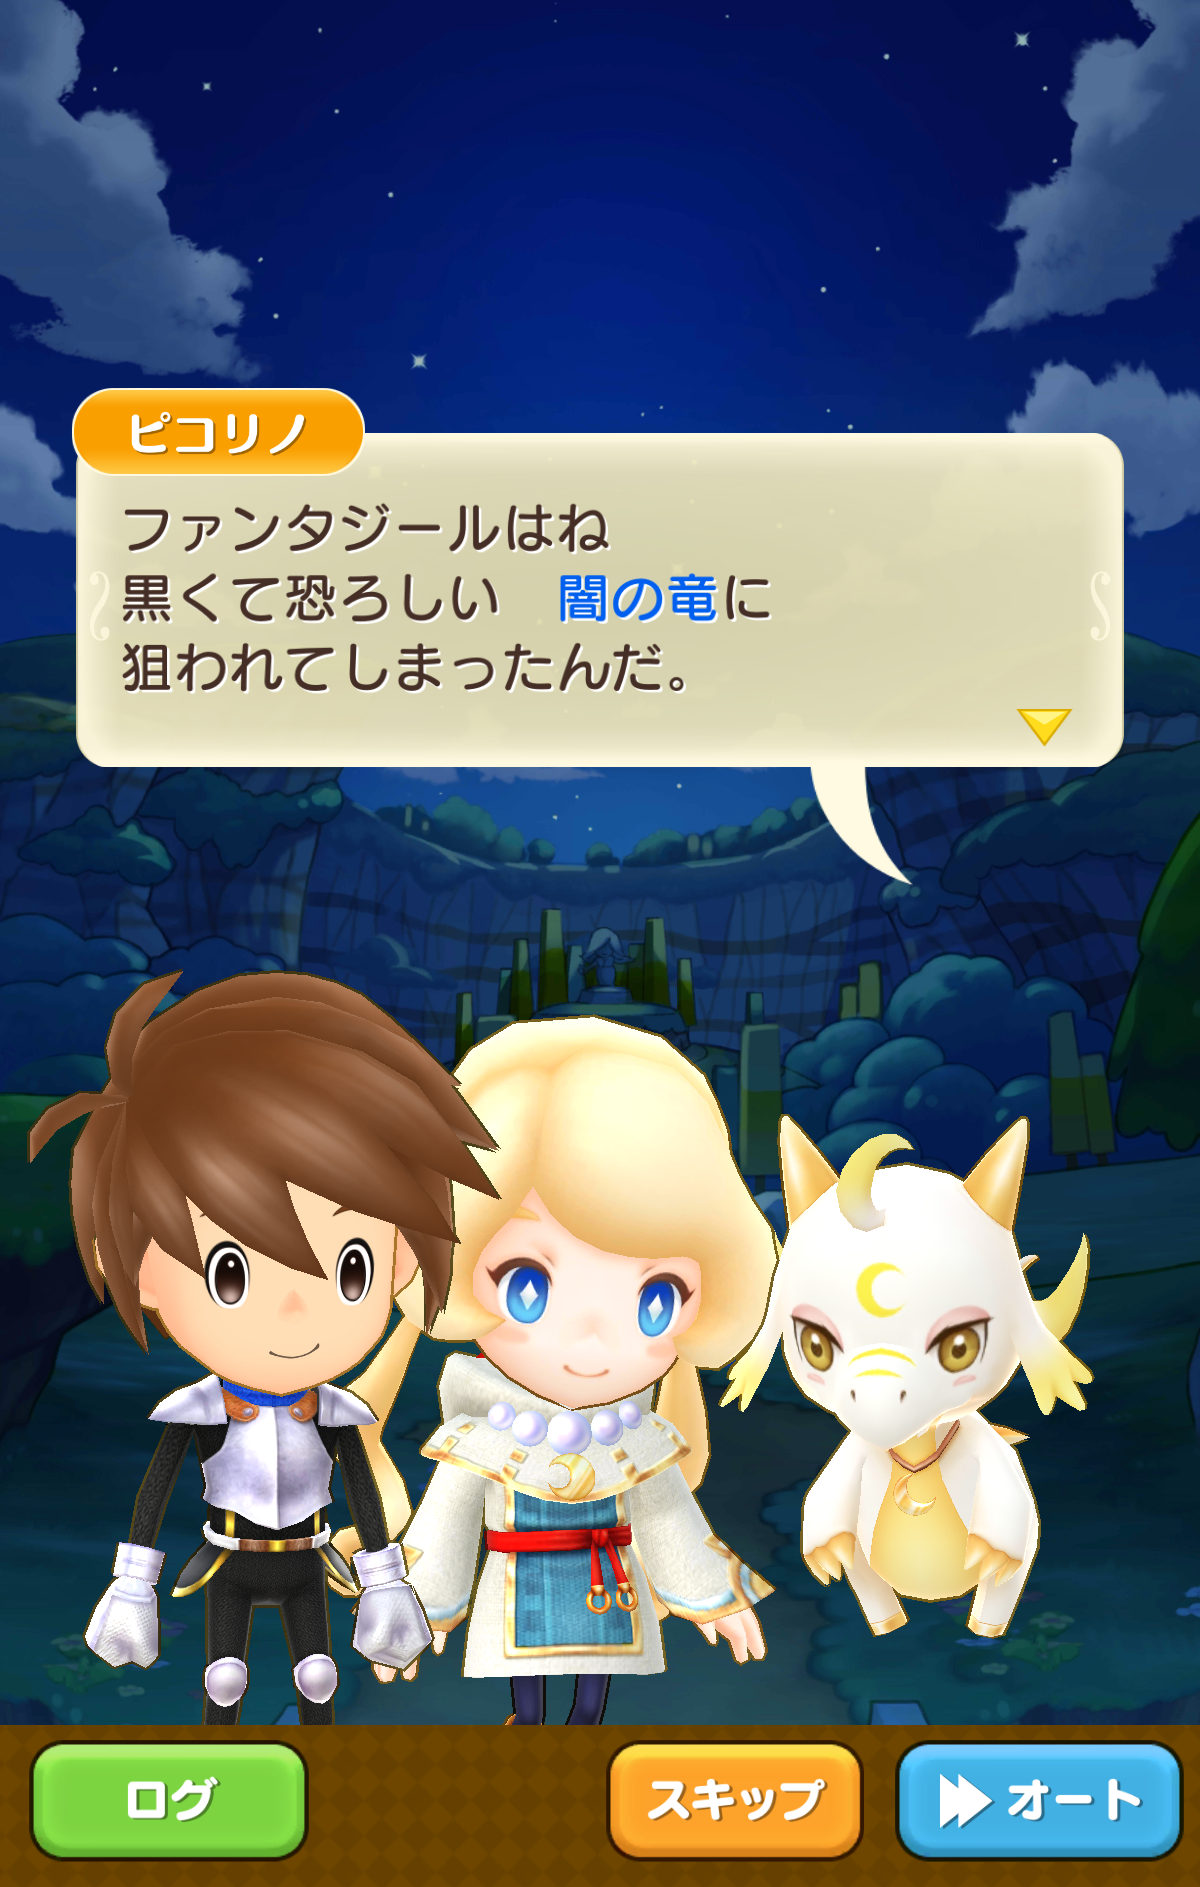 Fantasy Life Online Will Be Released in English - Fantasy Life Online -  TapTap